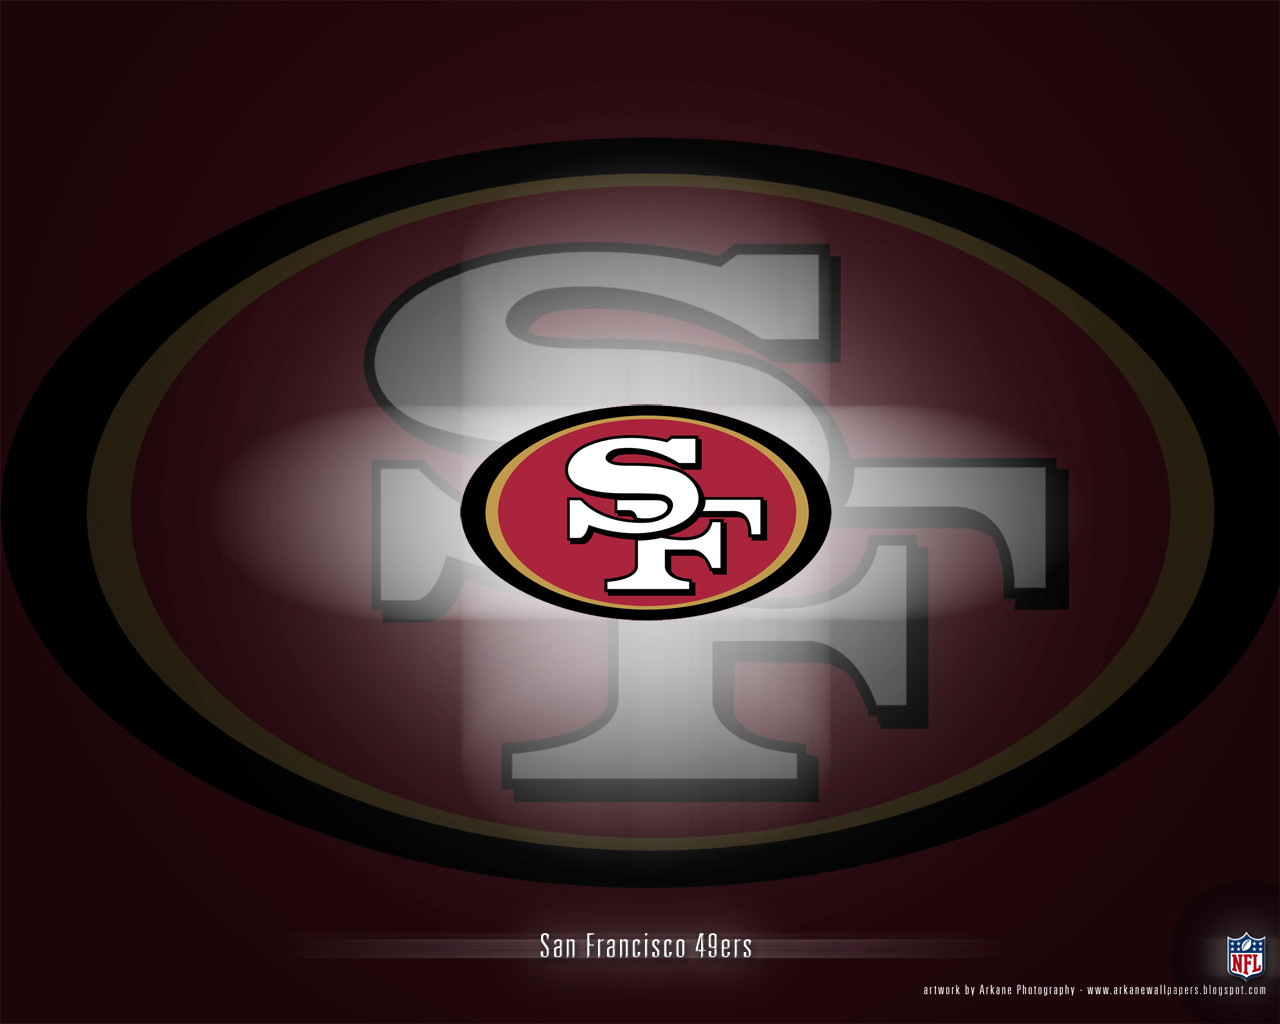 San Francisco 49ers wallpapers San Francisco 49ers background